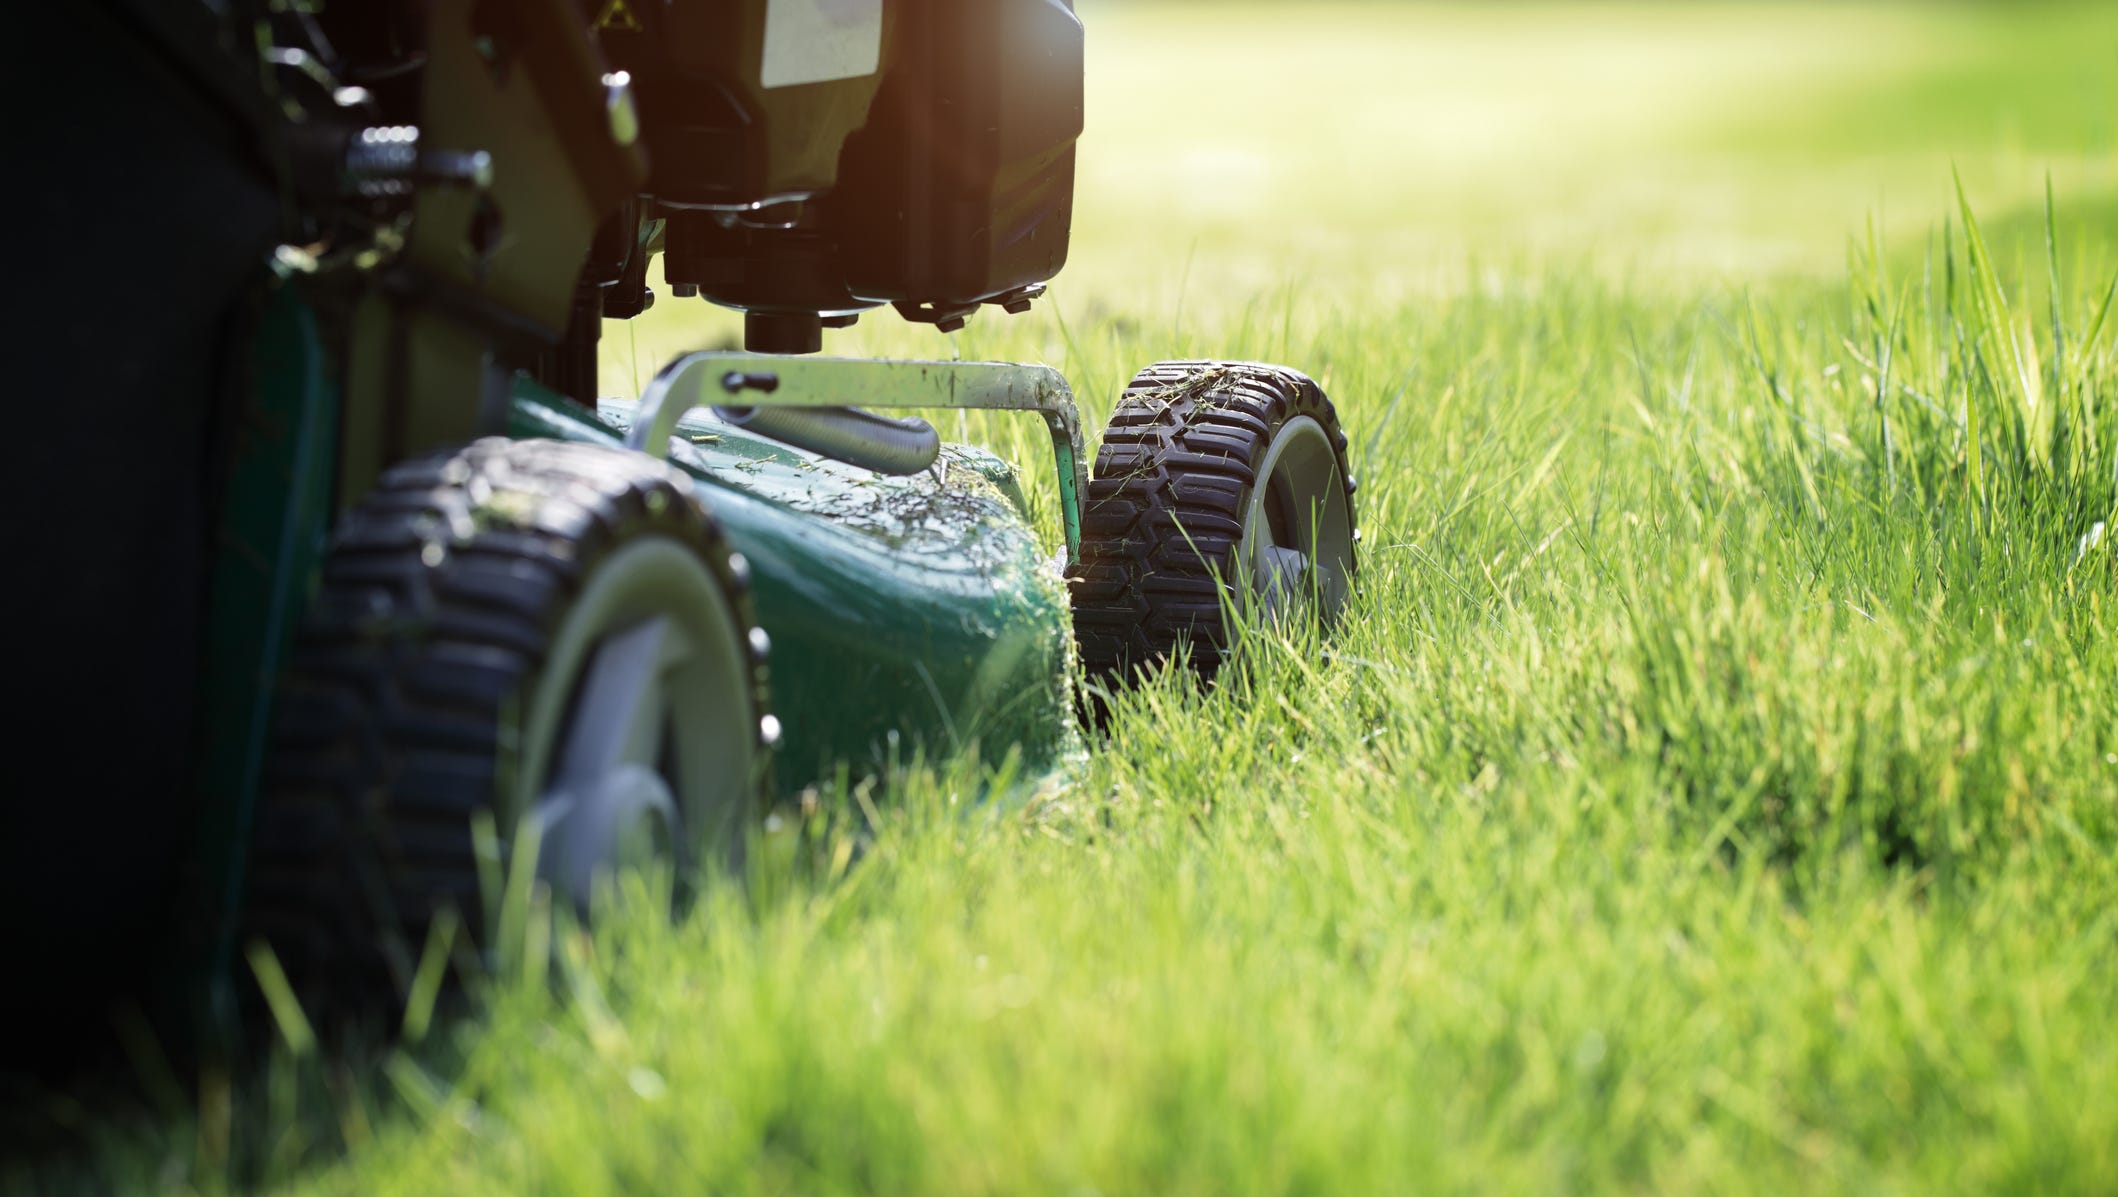 When to plant grass seed, how to repair patchy spots and other lawn care tips you need